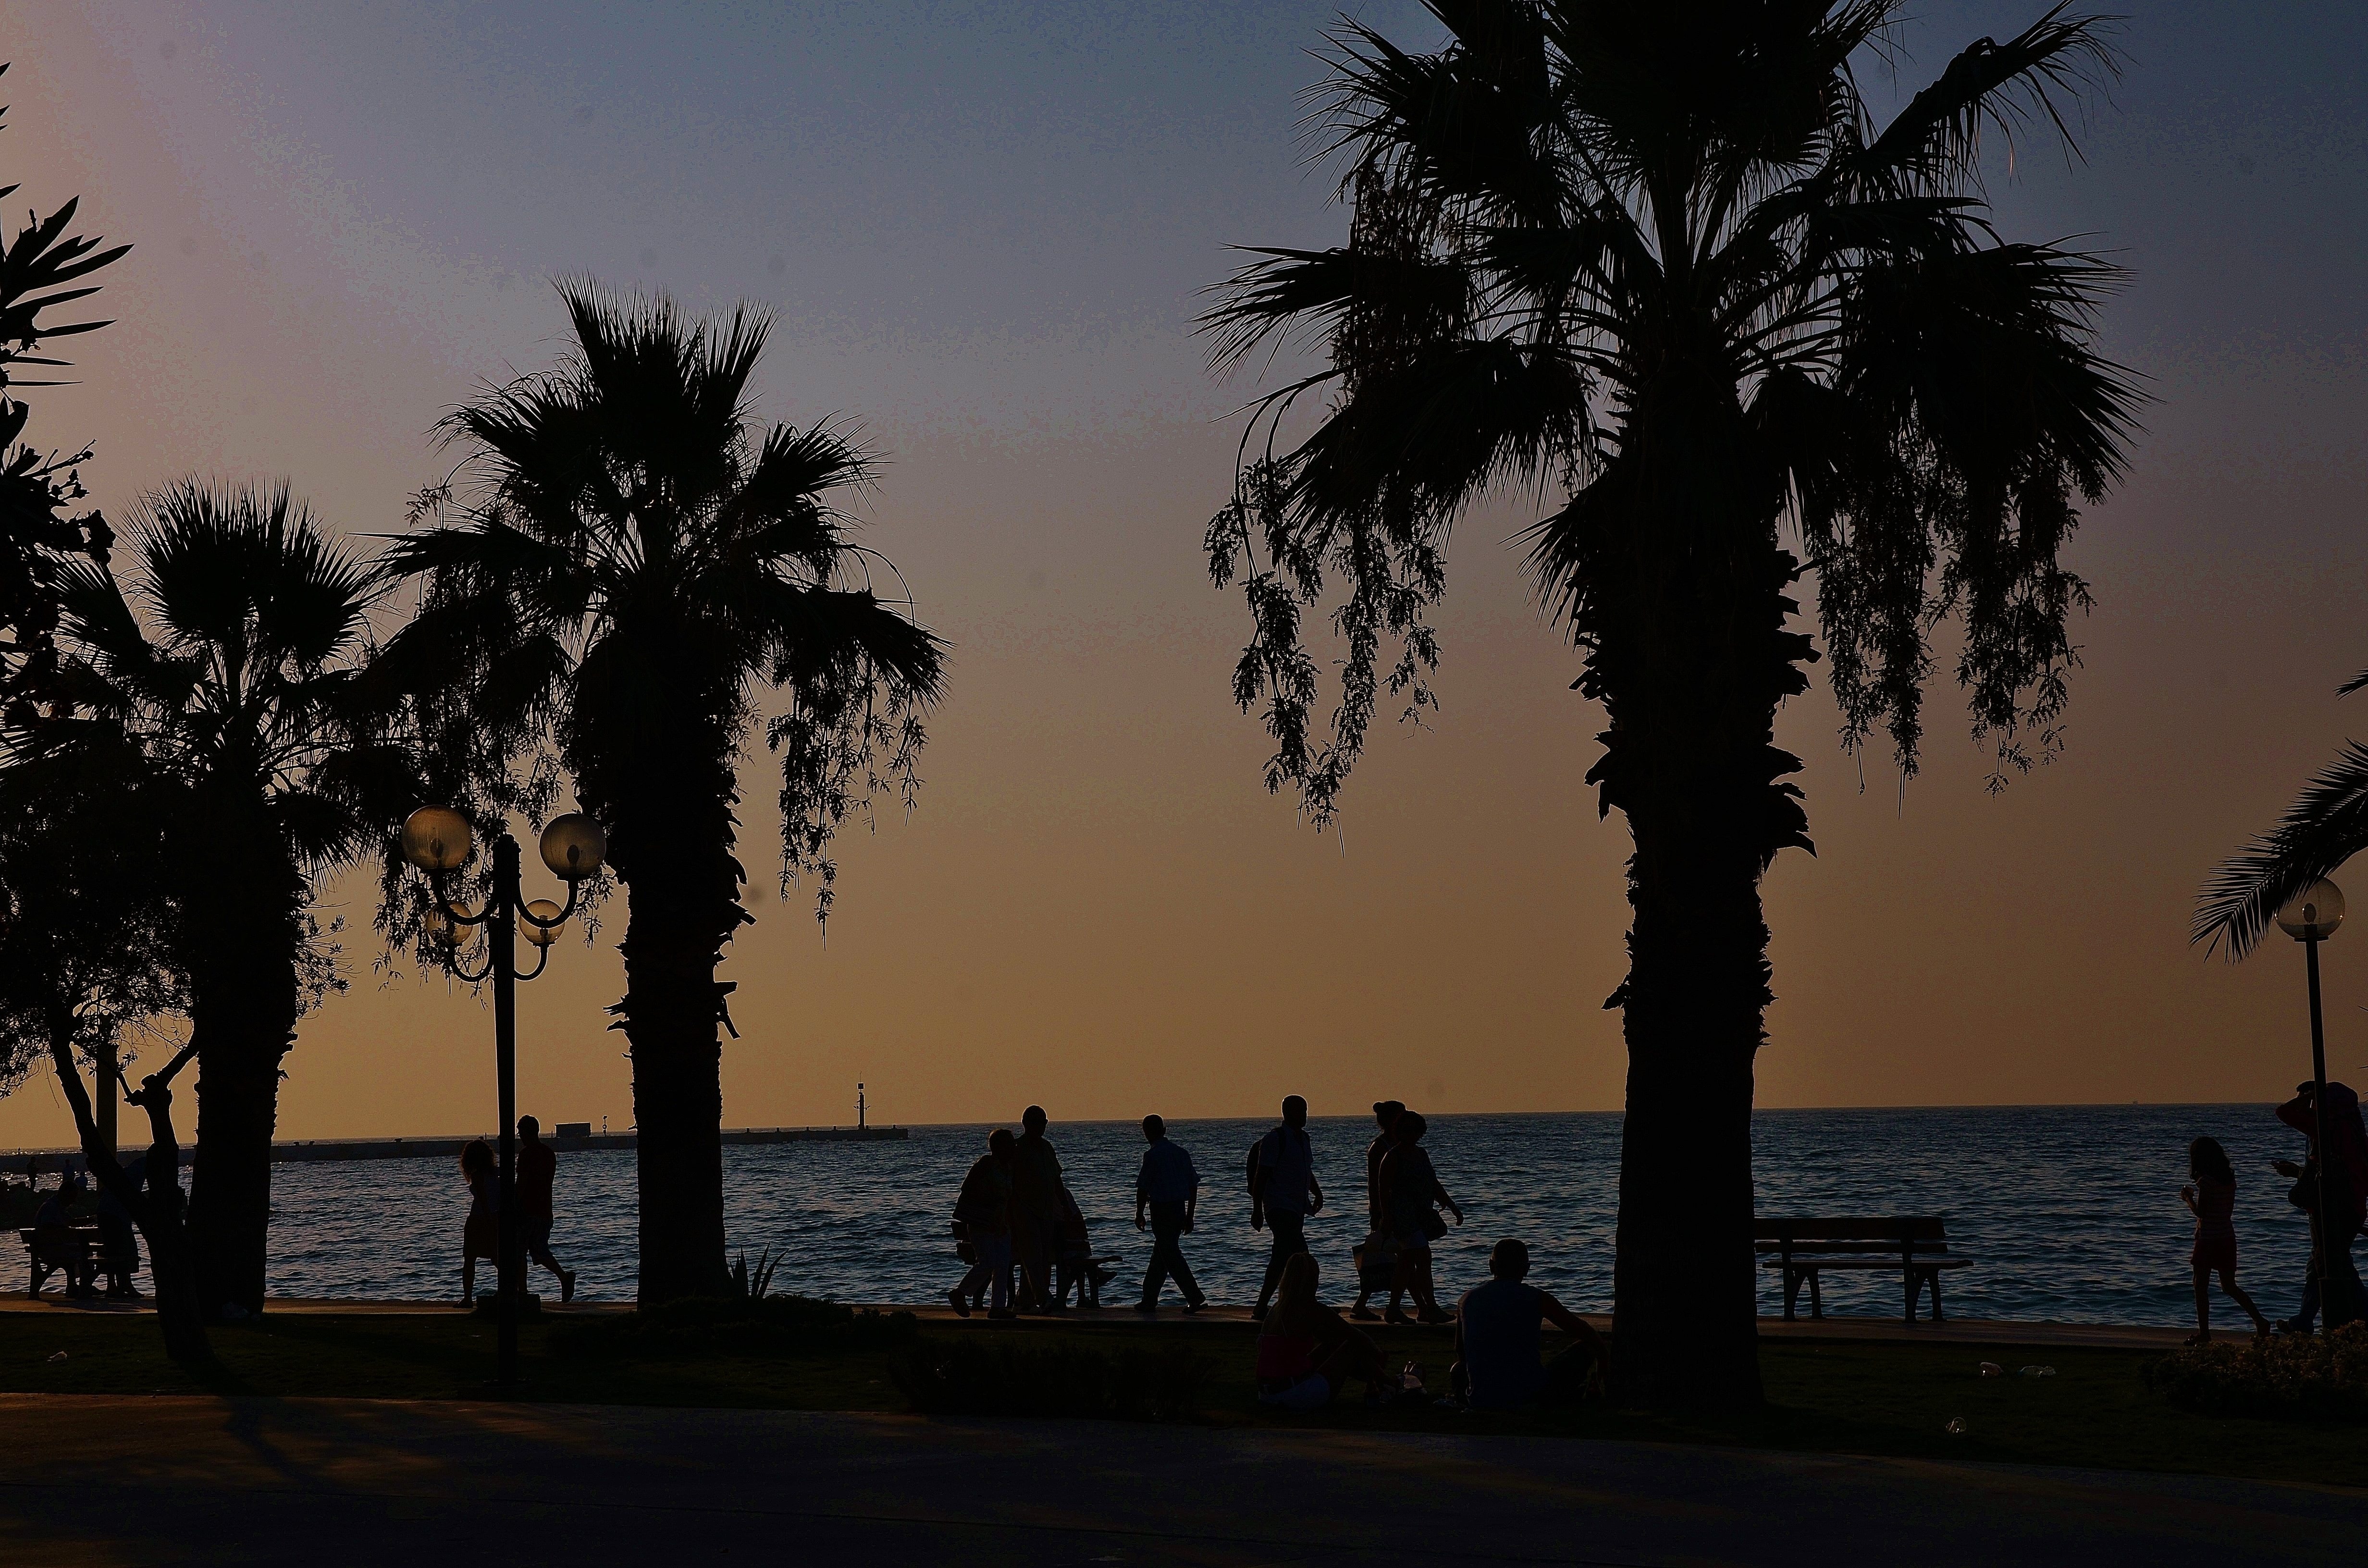 silhouette of trees and people walking near body of water